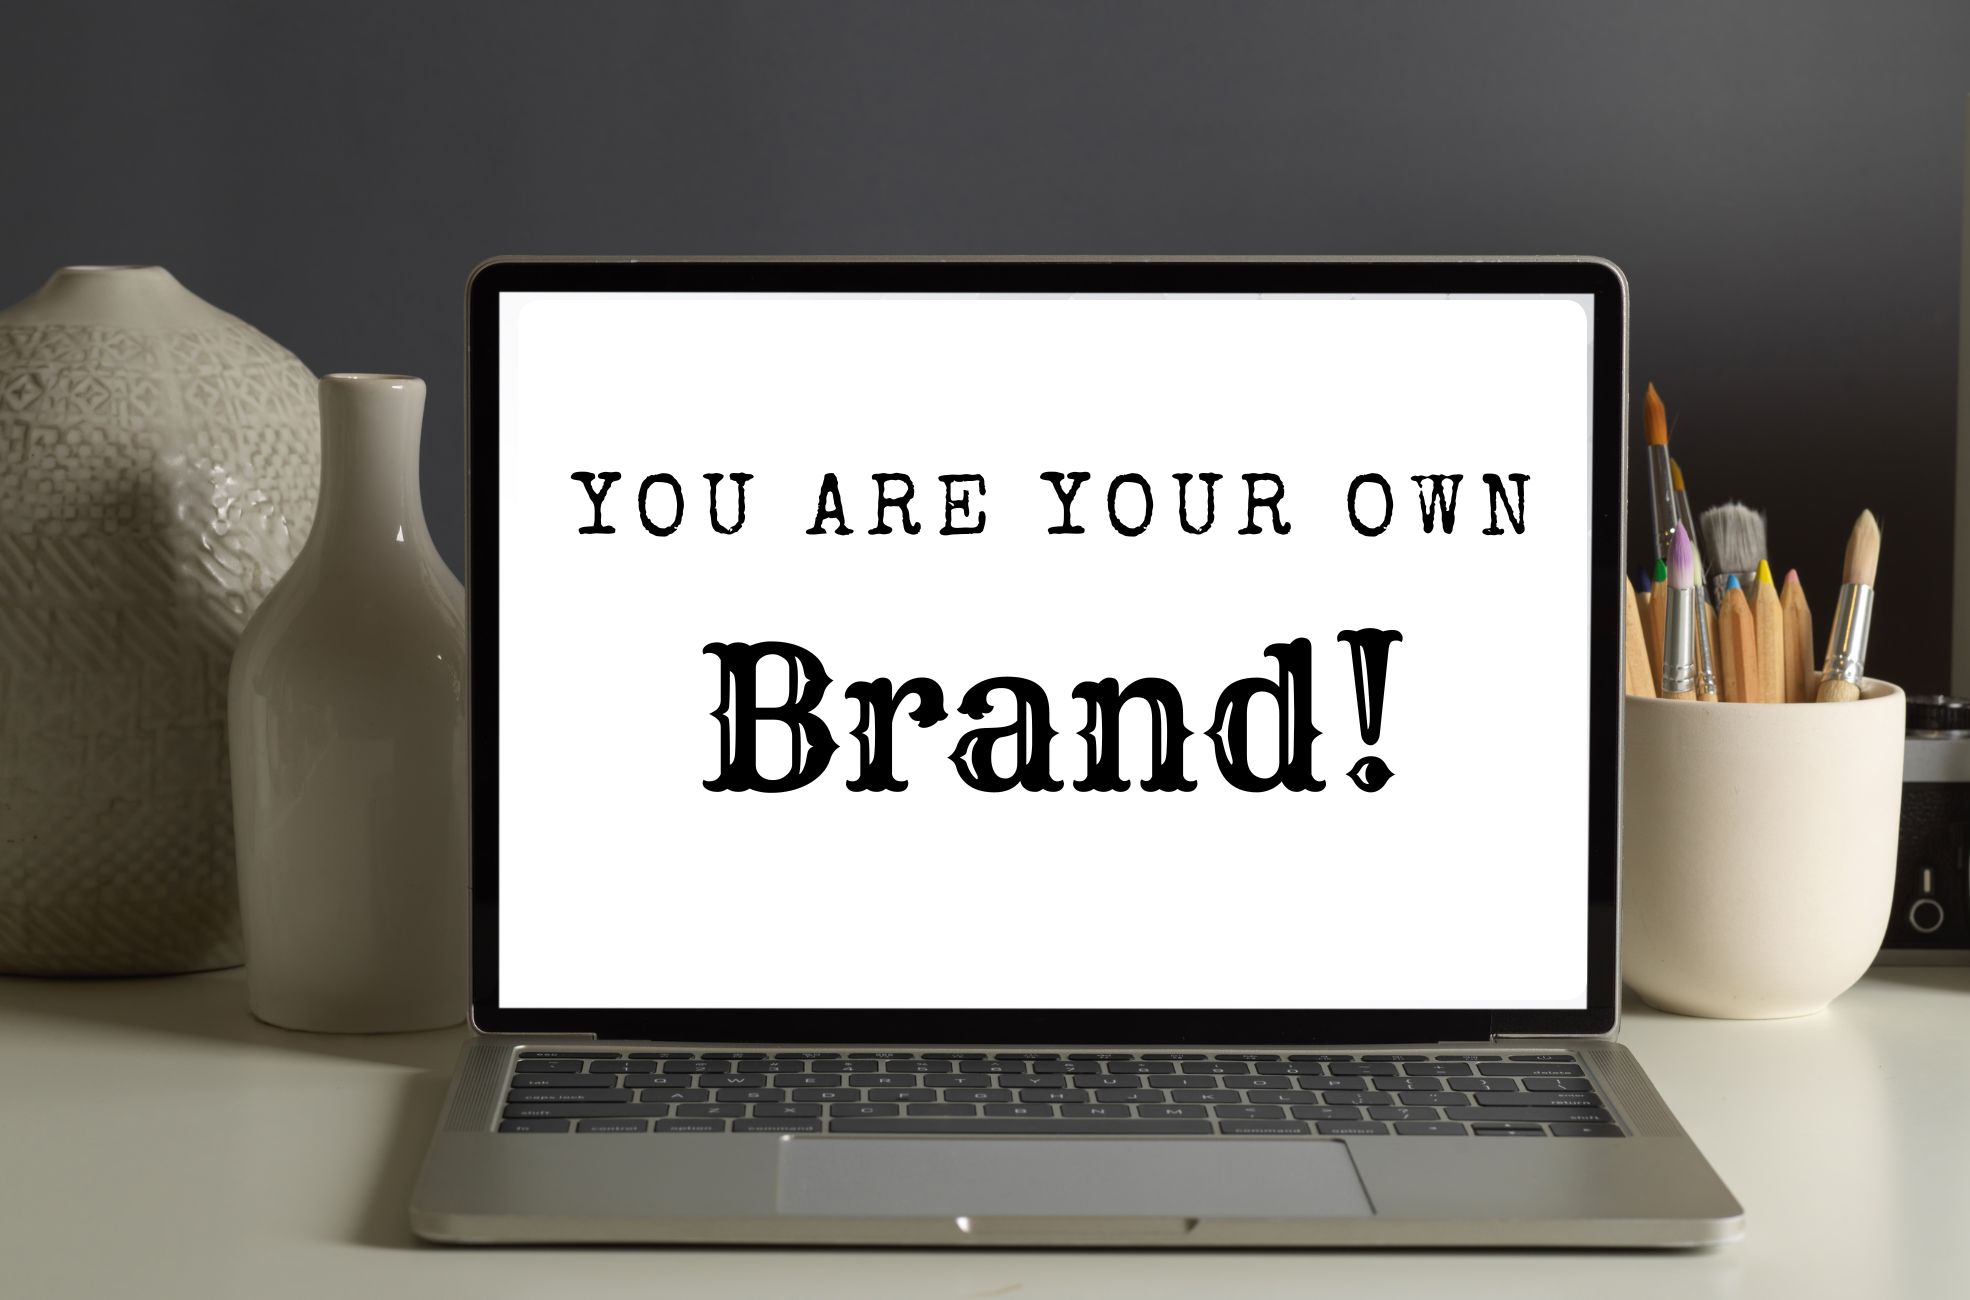 MacBook With "You Are Your Own Brand" Written On it